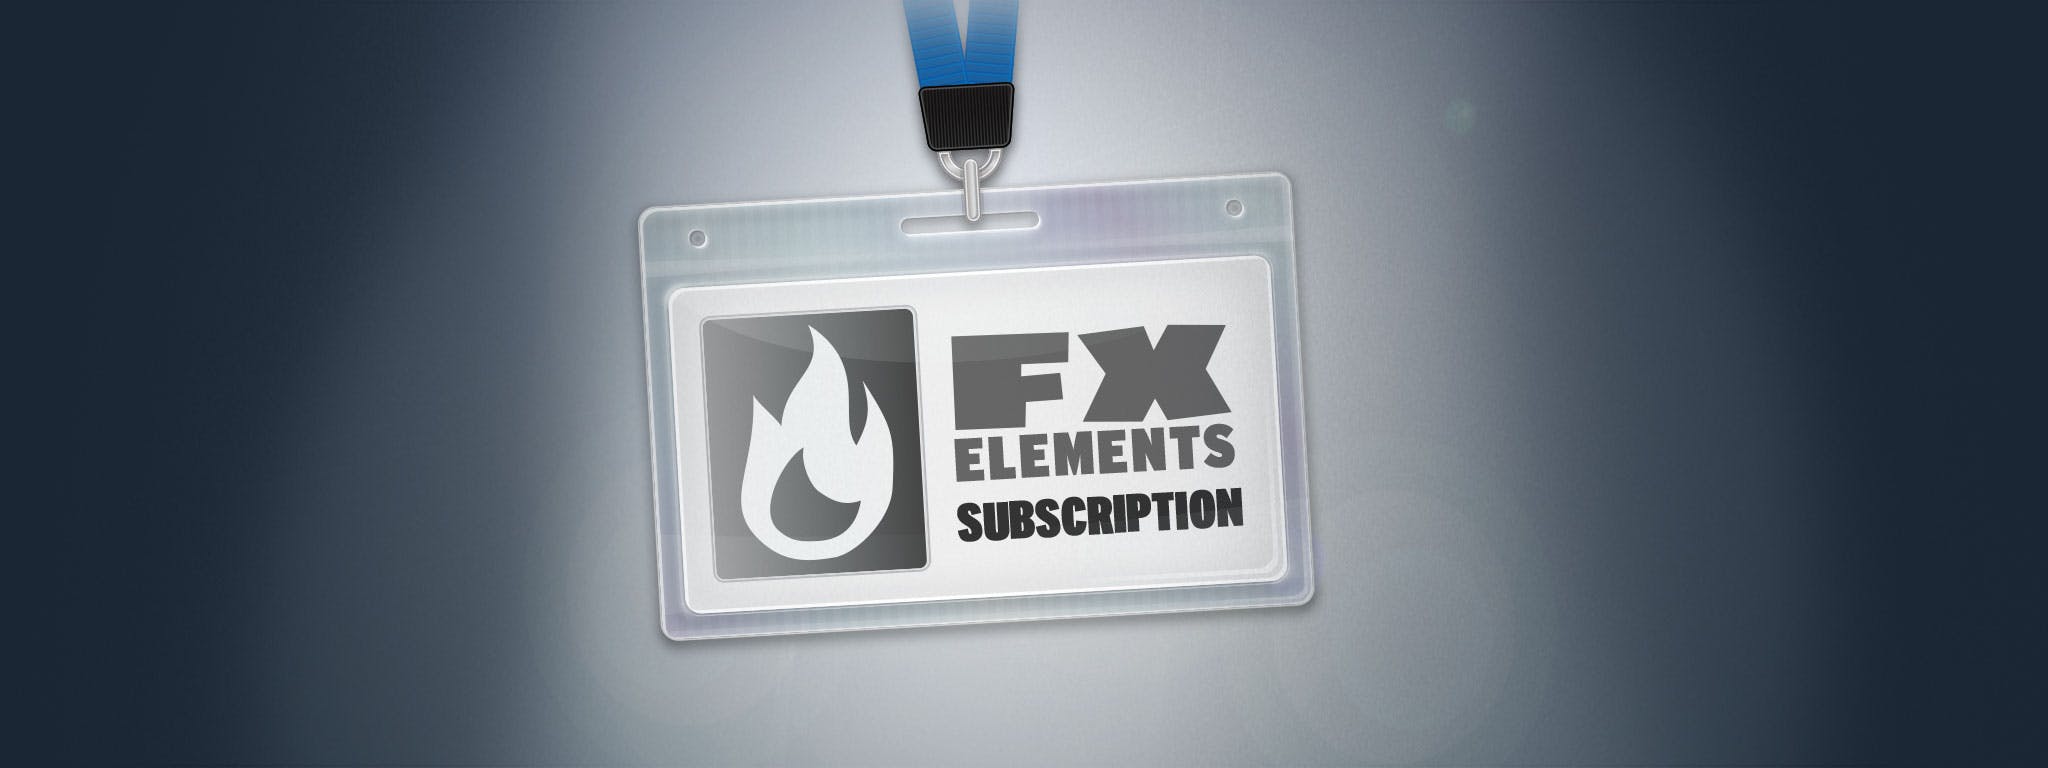 Introducing FX Elements Subscription